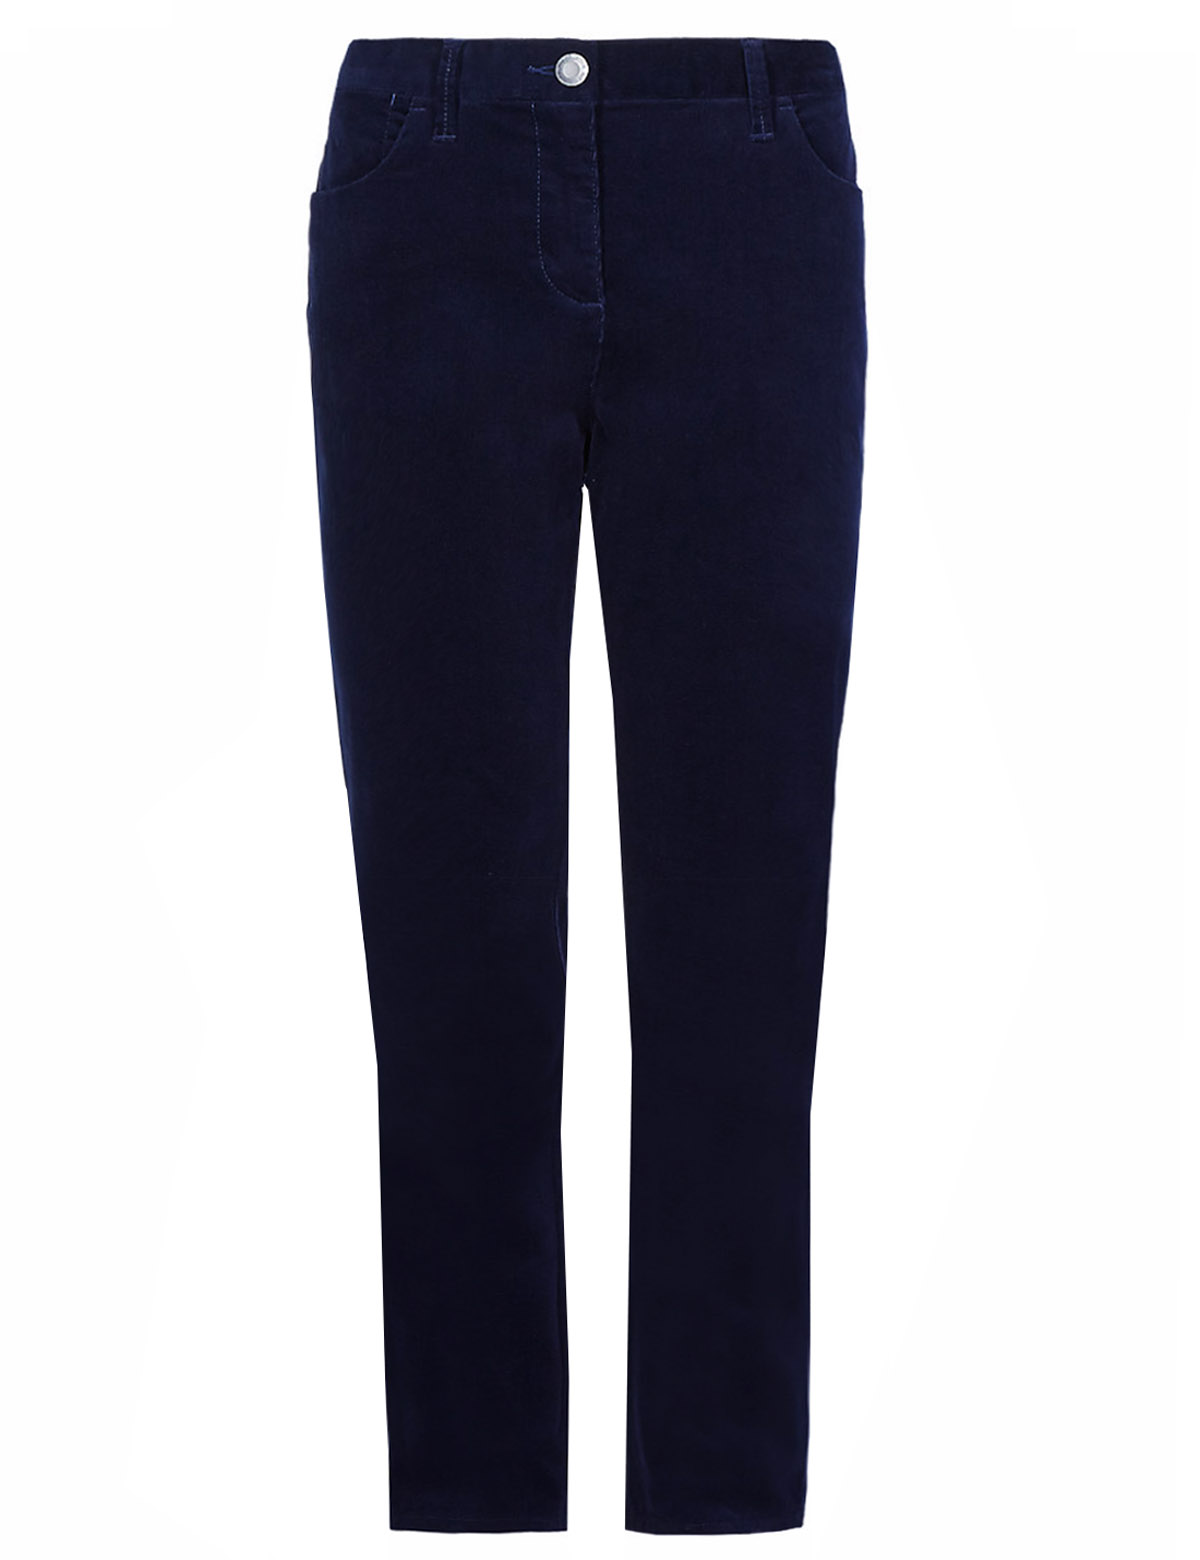 Marks and Spencer - - M&5 NAVY Cotton Rich Cord Straight Leg Trousers ...